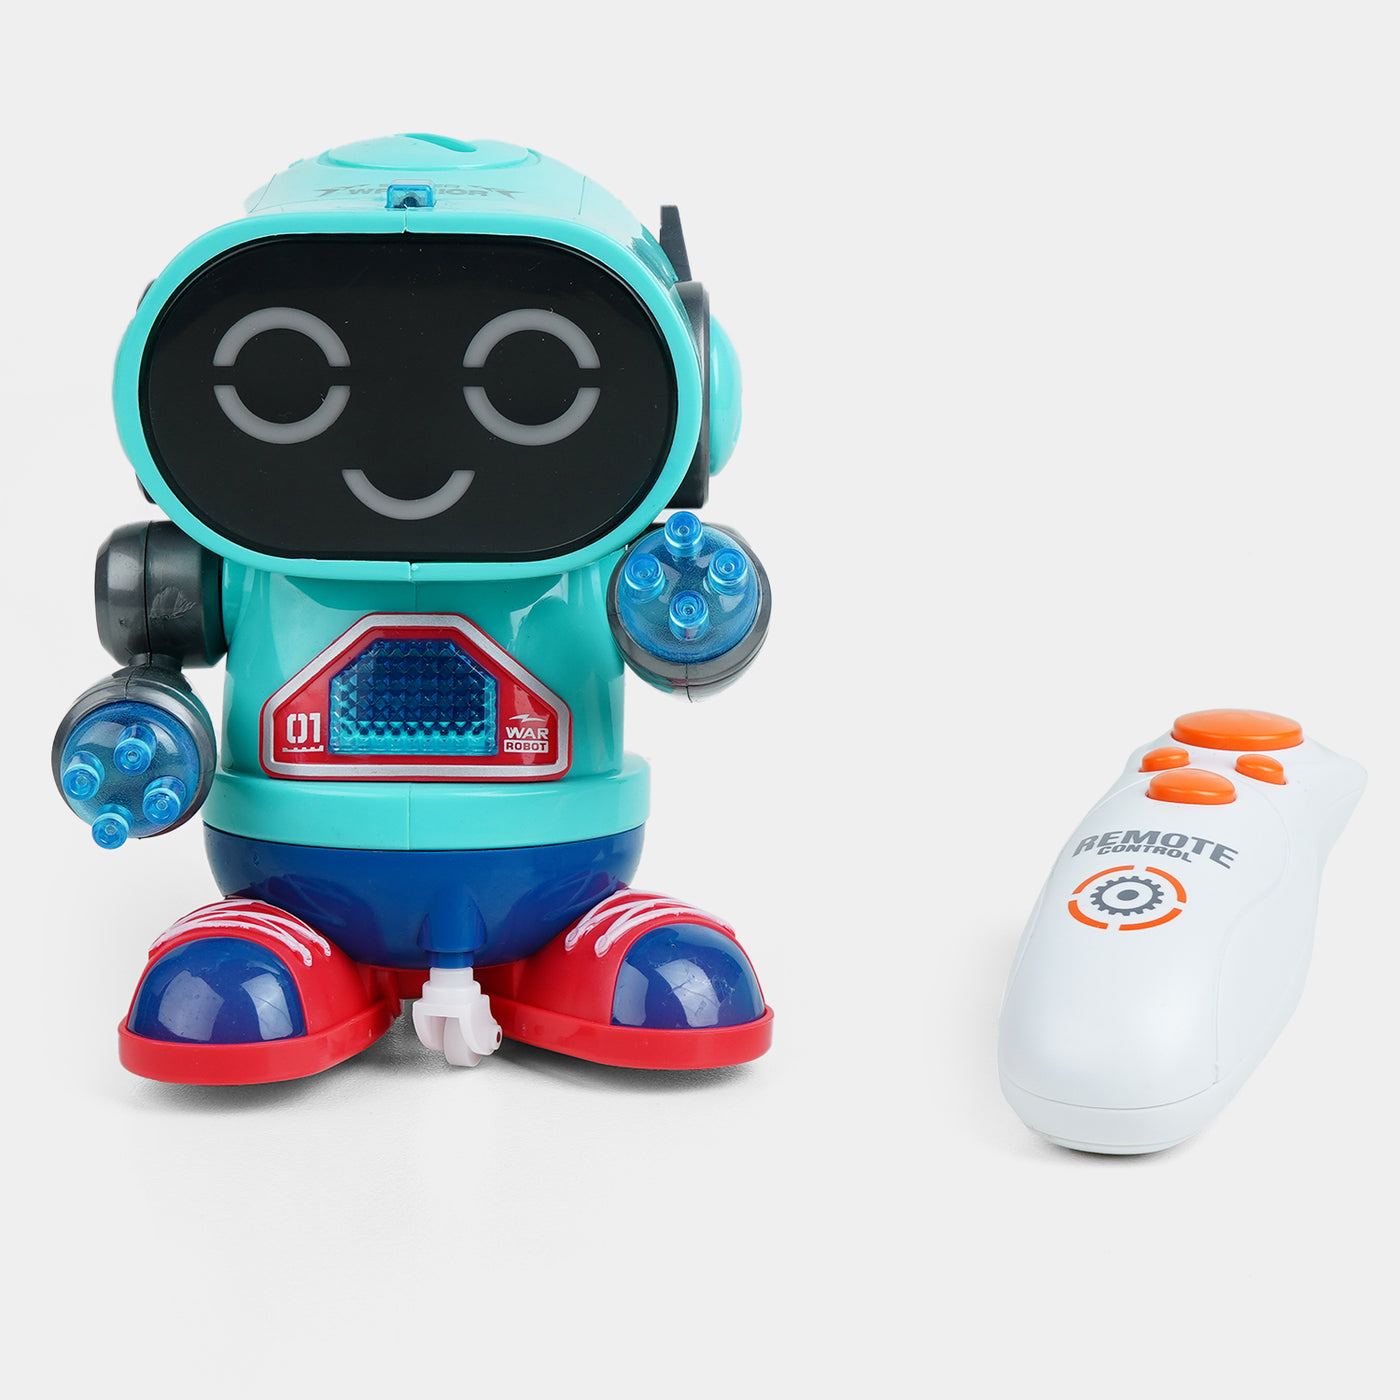 Remote Control Fun Robot With Light & Music For Kids